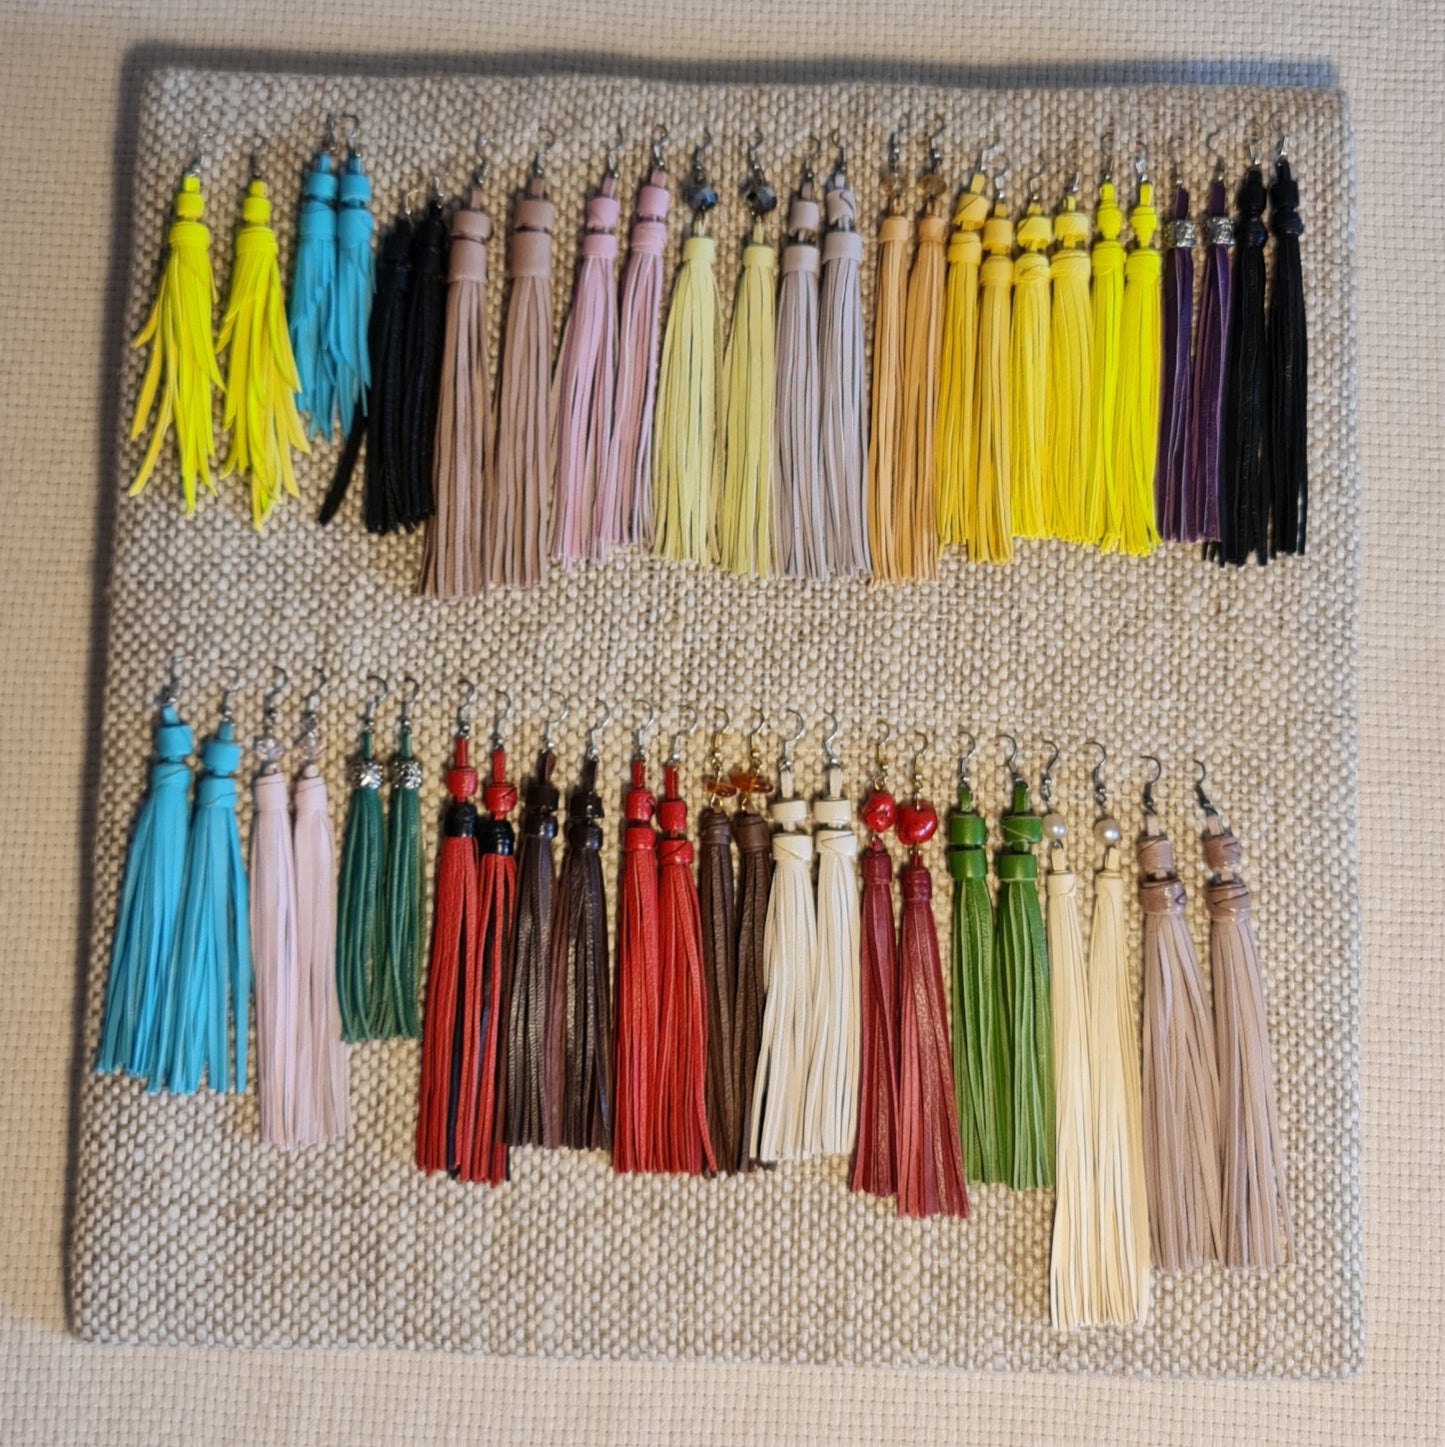 Light leather ribbon earrings in ivory color of equal length leather strips with beads on top (length 15.5 cm) bottom row 11th from the left (JŠČ)